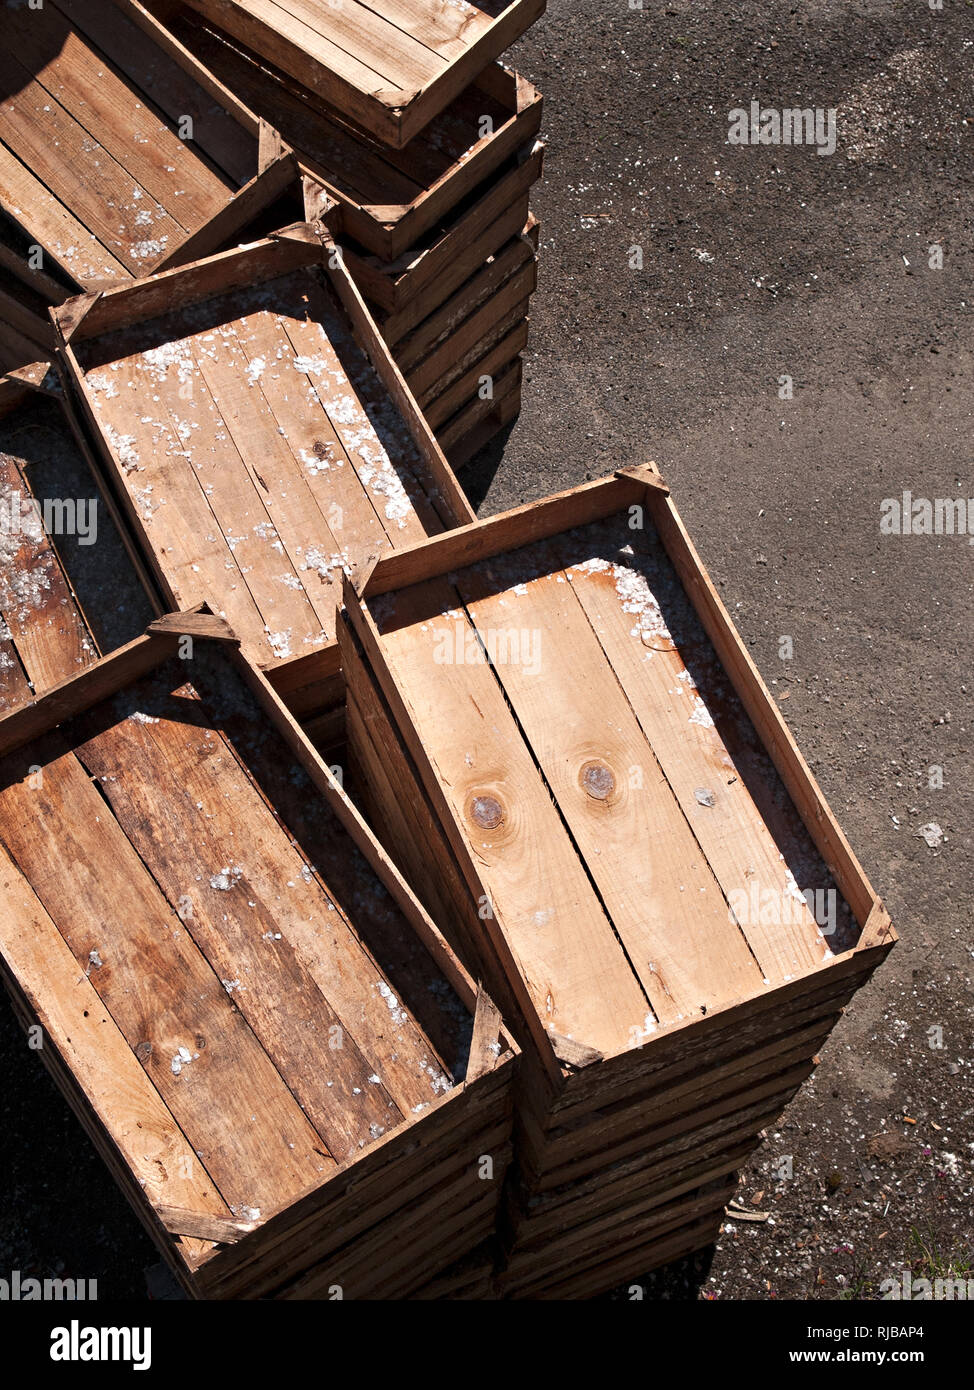 Fishing industry concept. Empty wooden fish crates stacked on pier. Top view Stock Photo